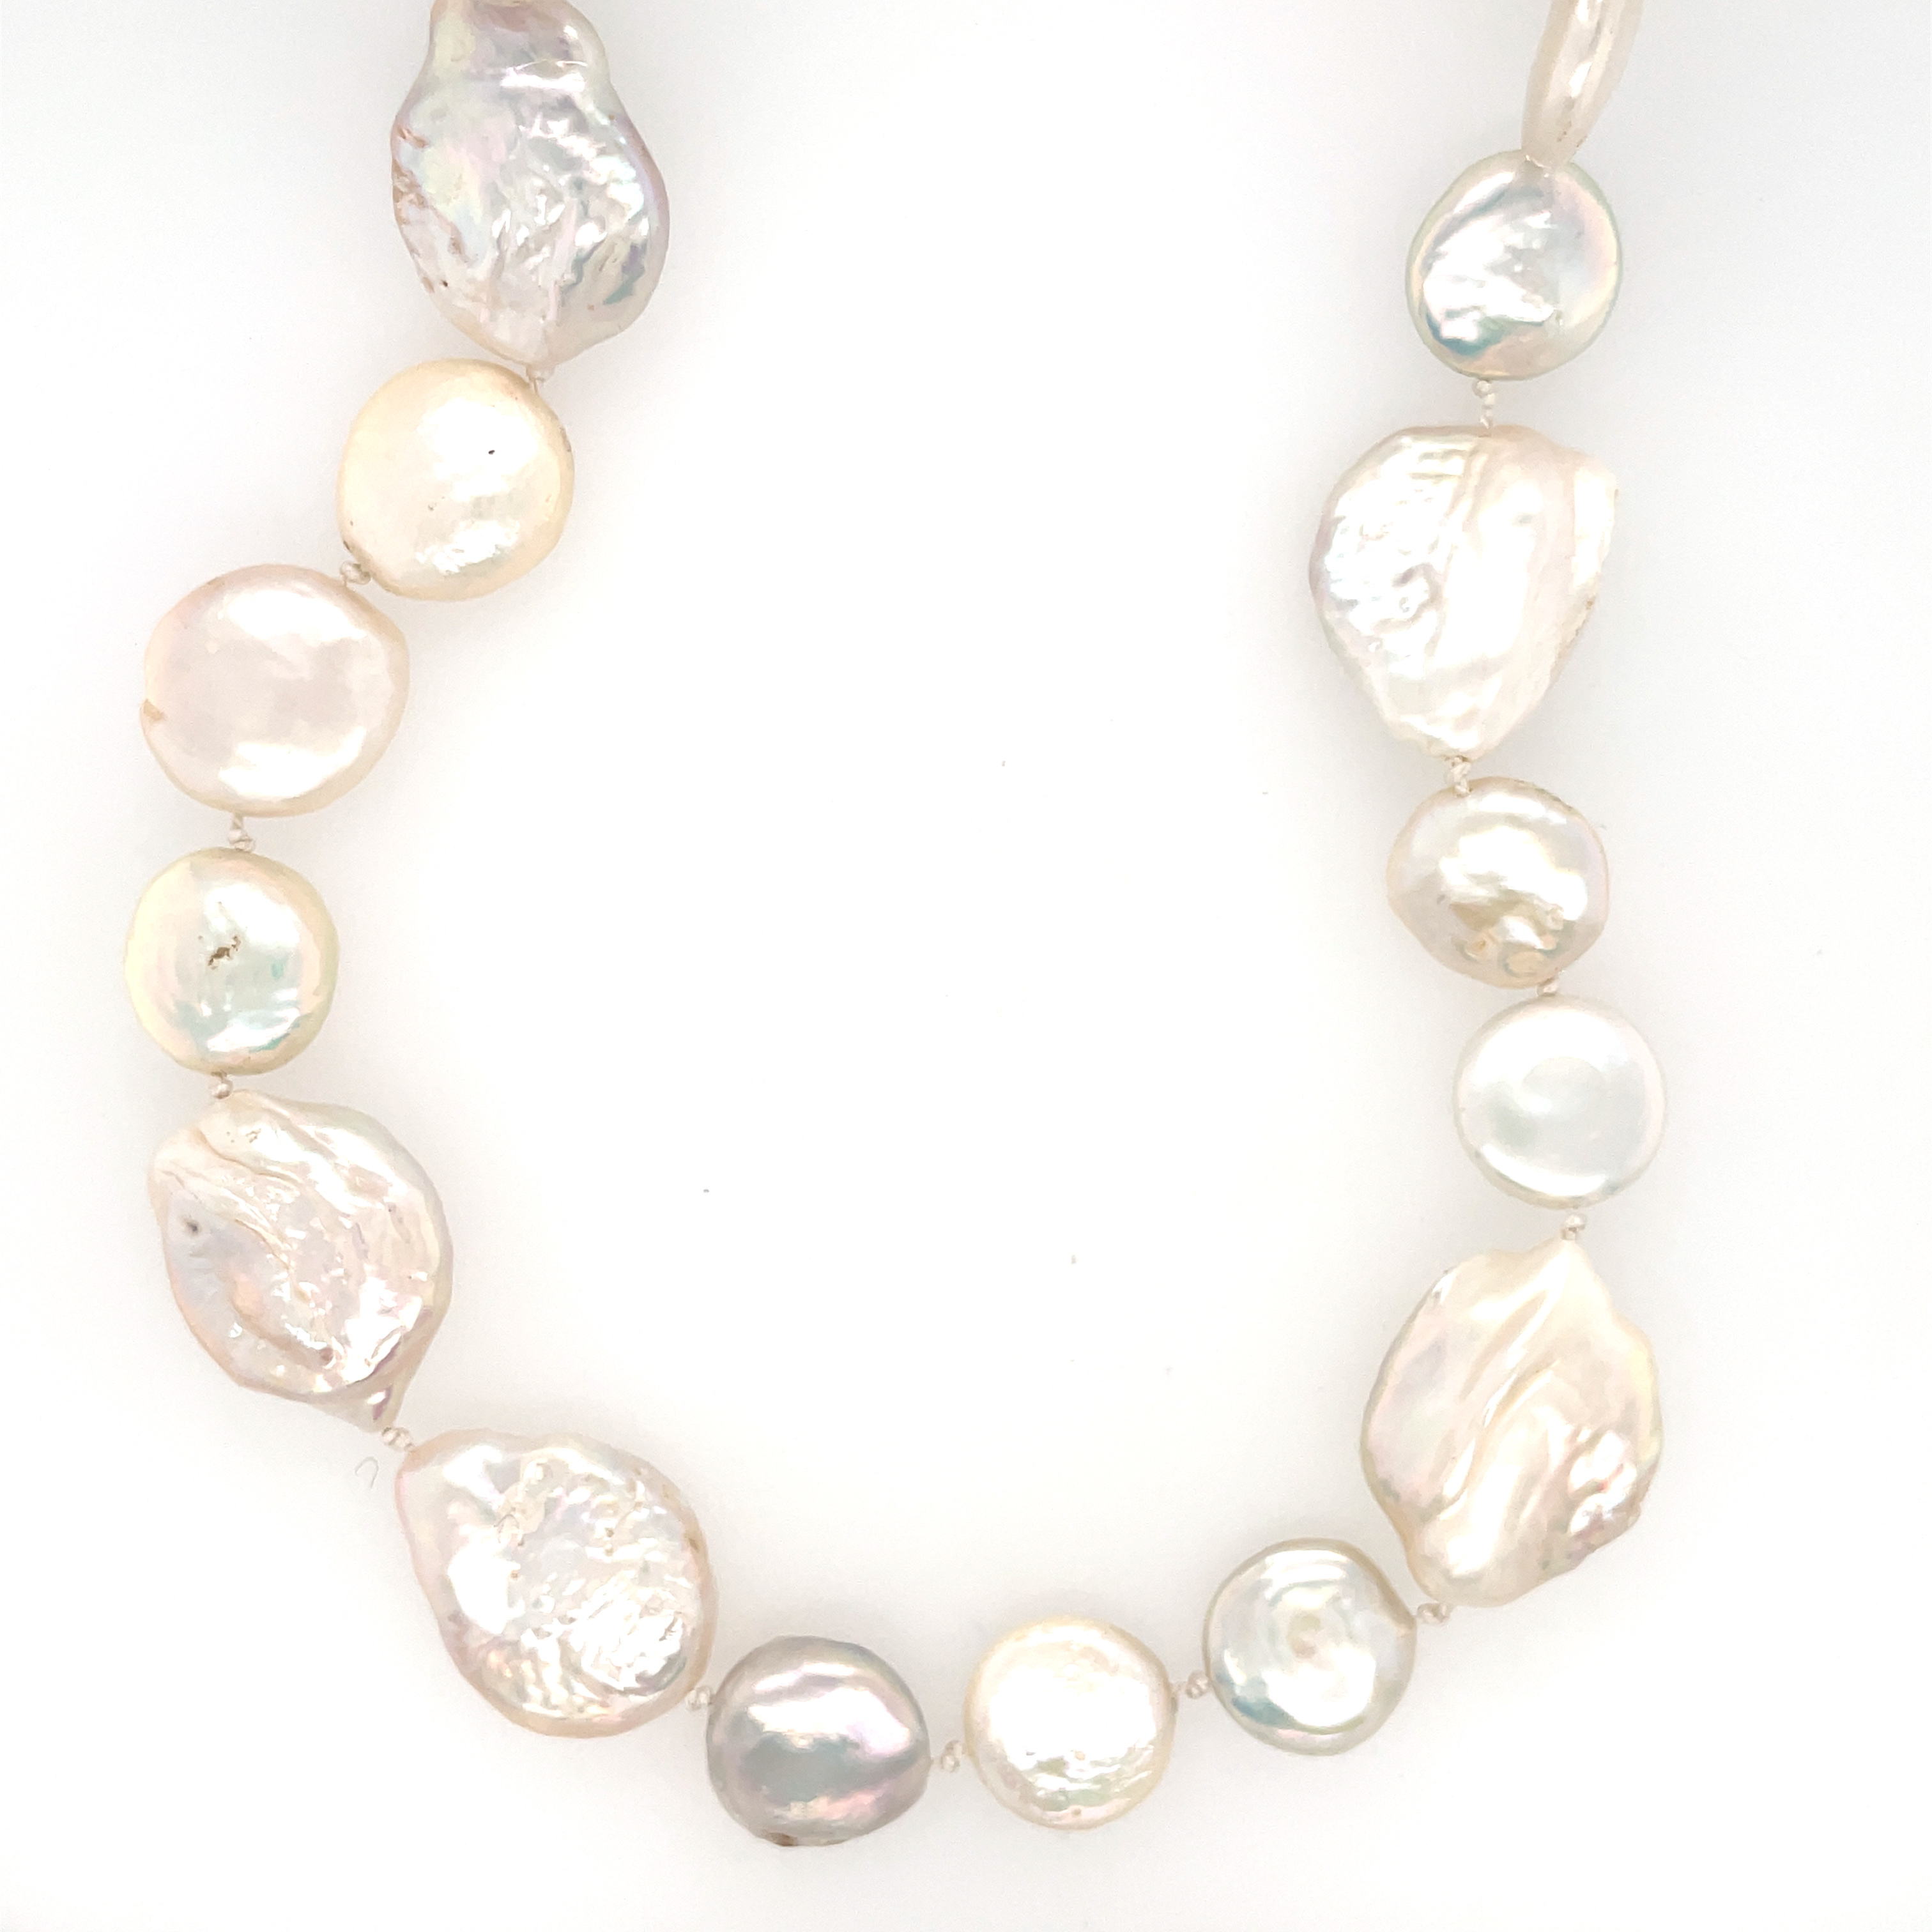 White Coin and Baroque Pearl Necklace with Hand Fabricated Sterling Clasp